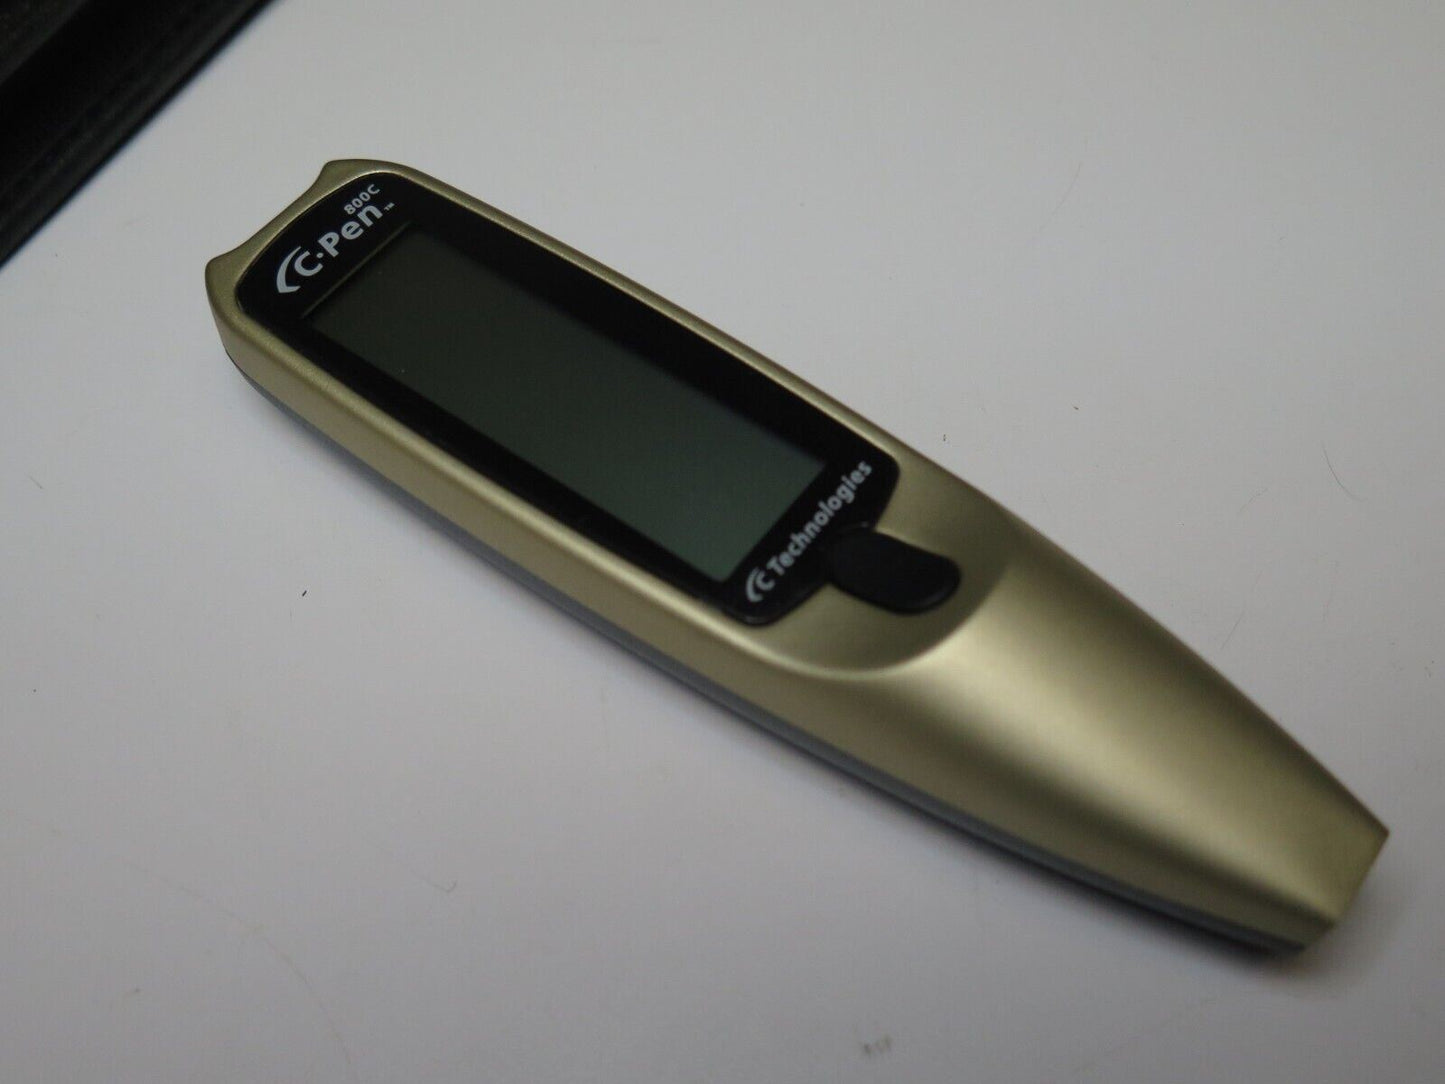 C-Pen 800C Reader Pen - Translate Books or Transfer & Process Any Text to a PC  